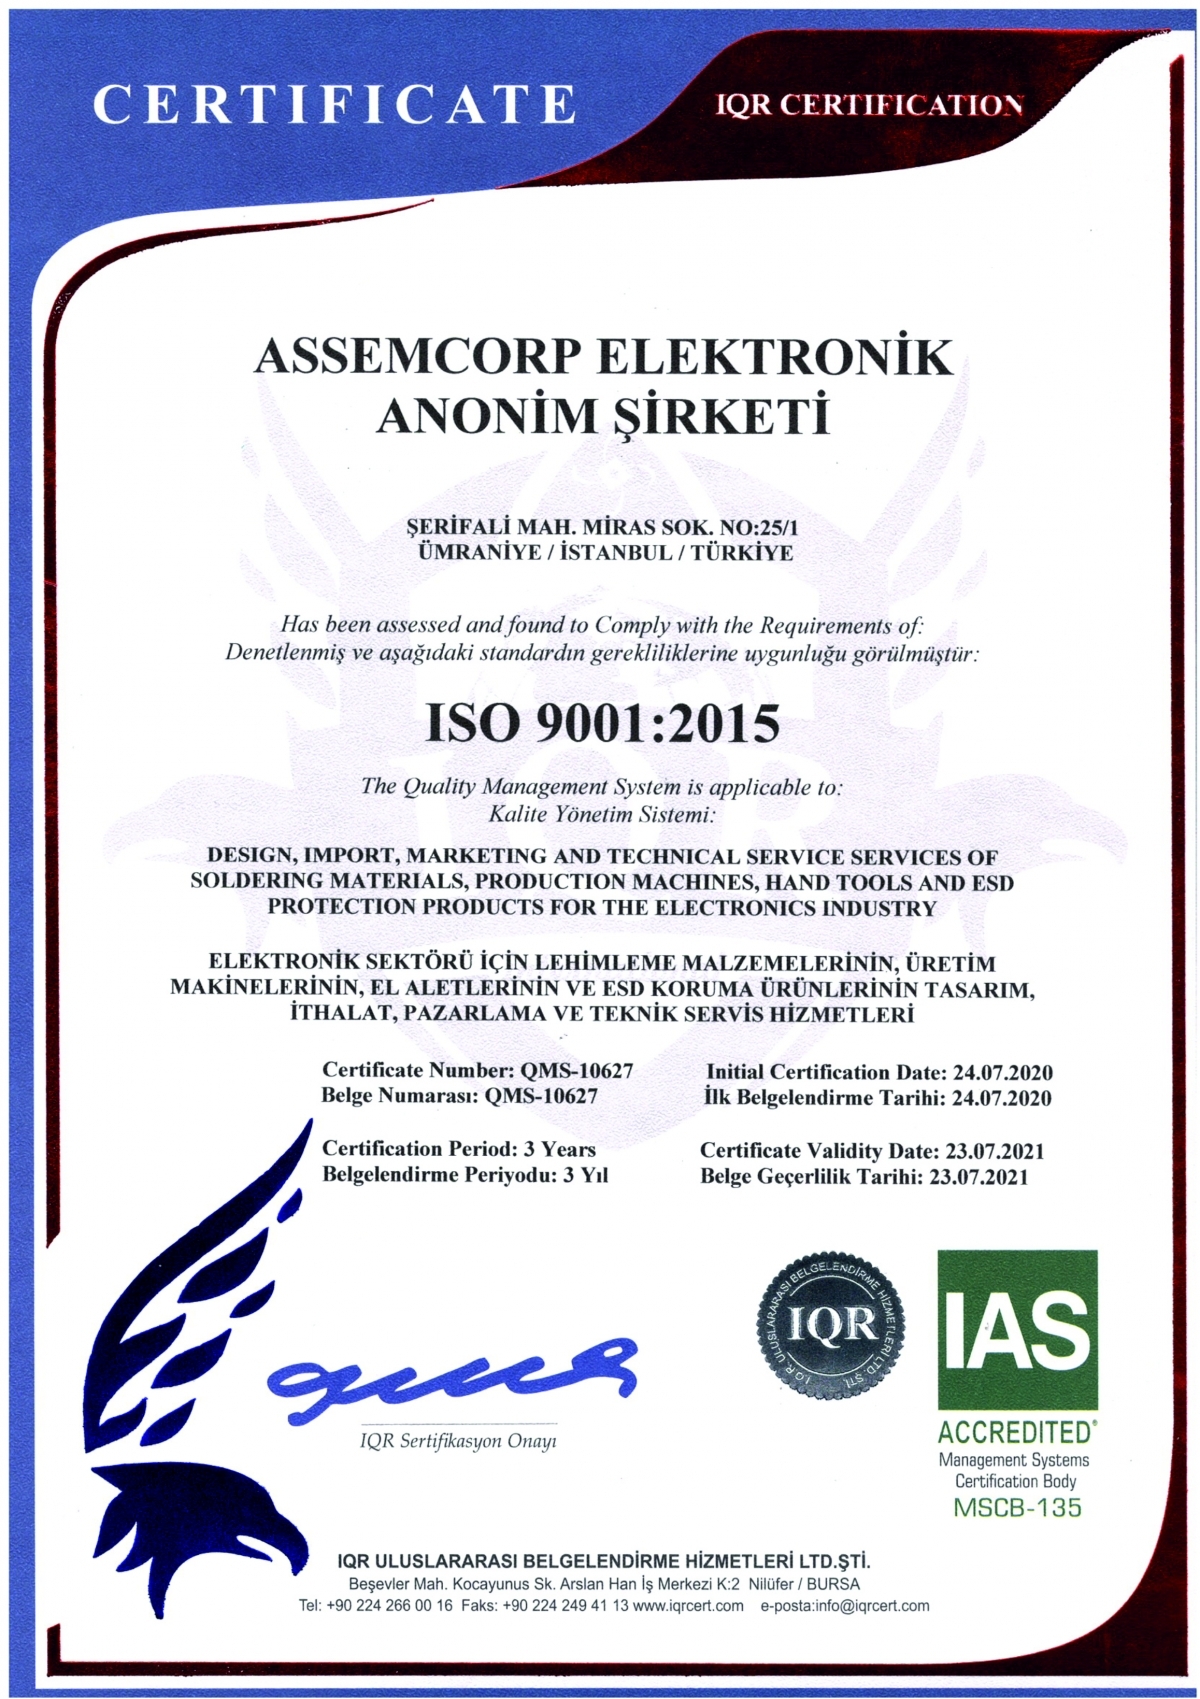 AssemCorp is to comply with ISO 9001, ISO 14001 and ISO 45001